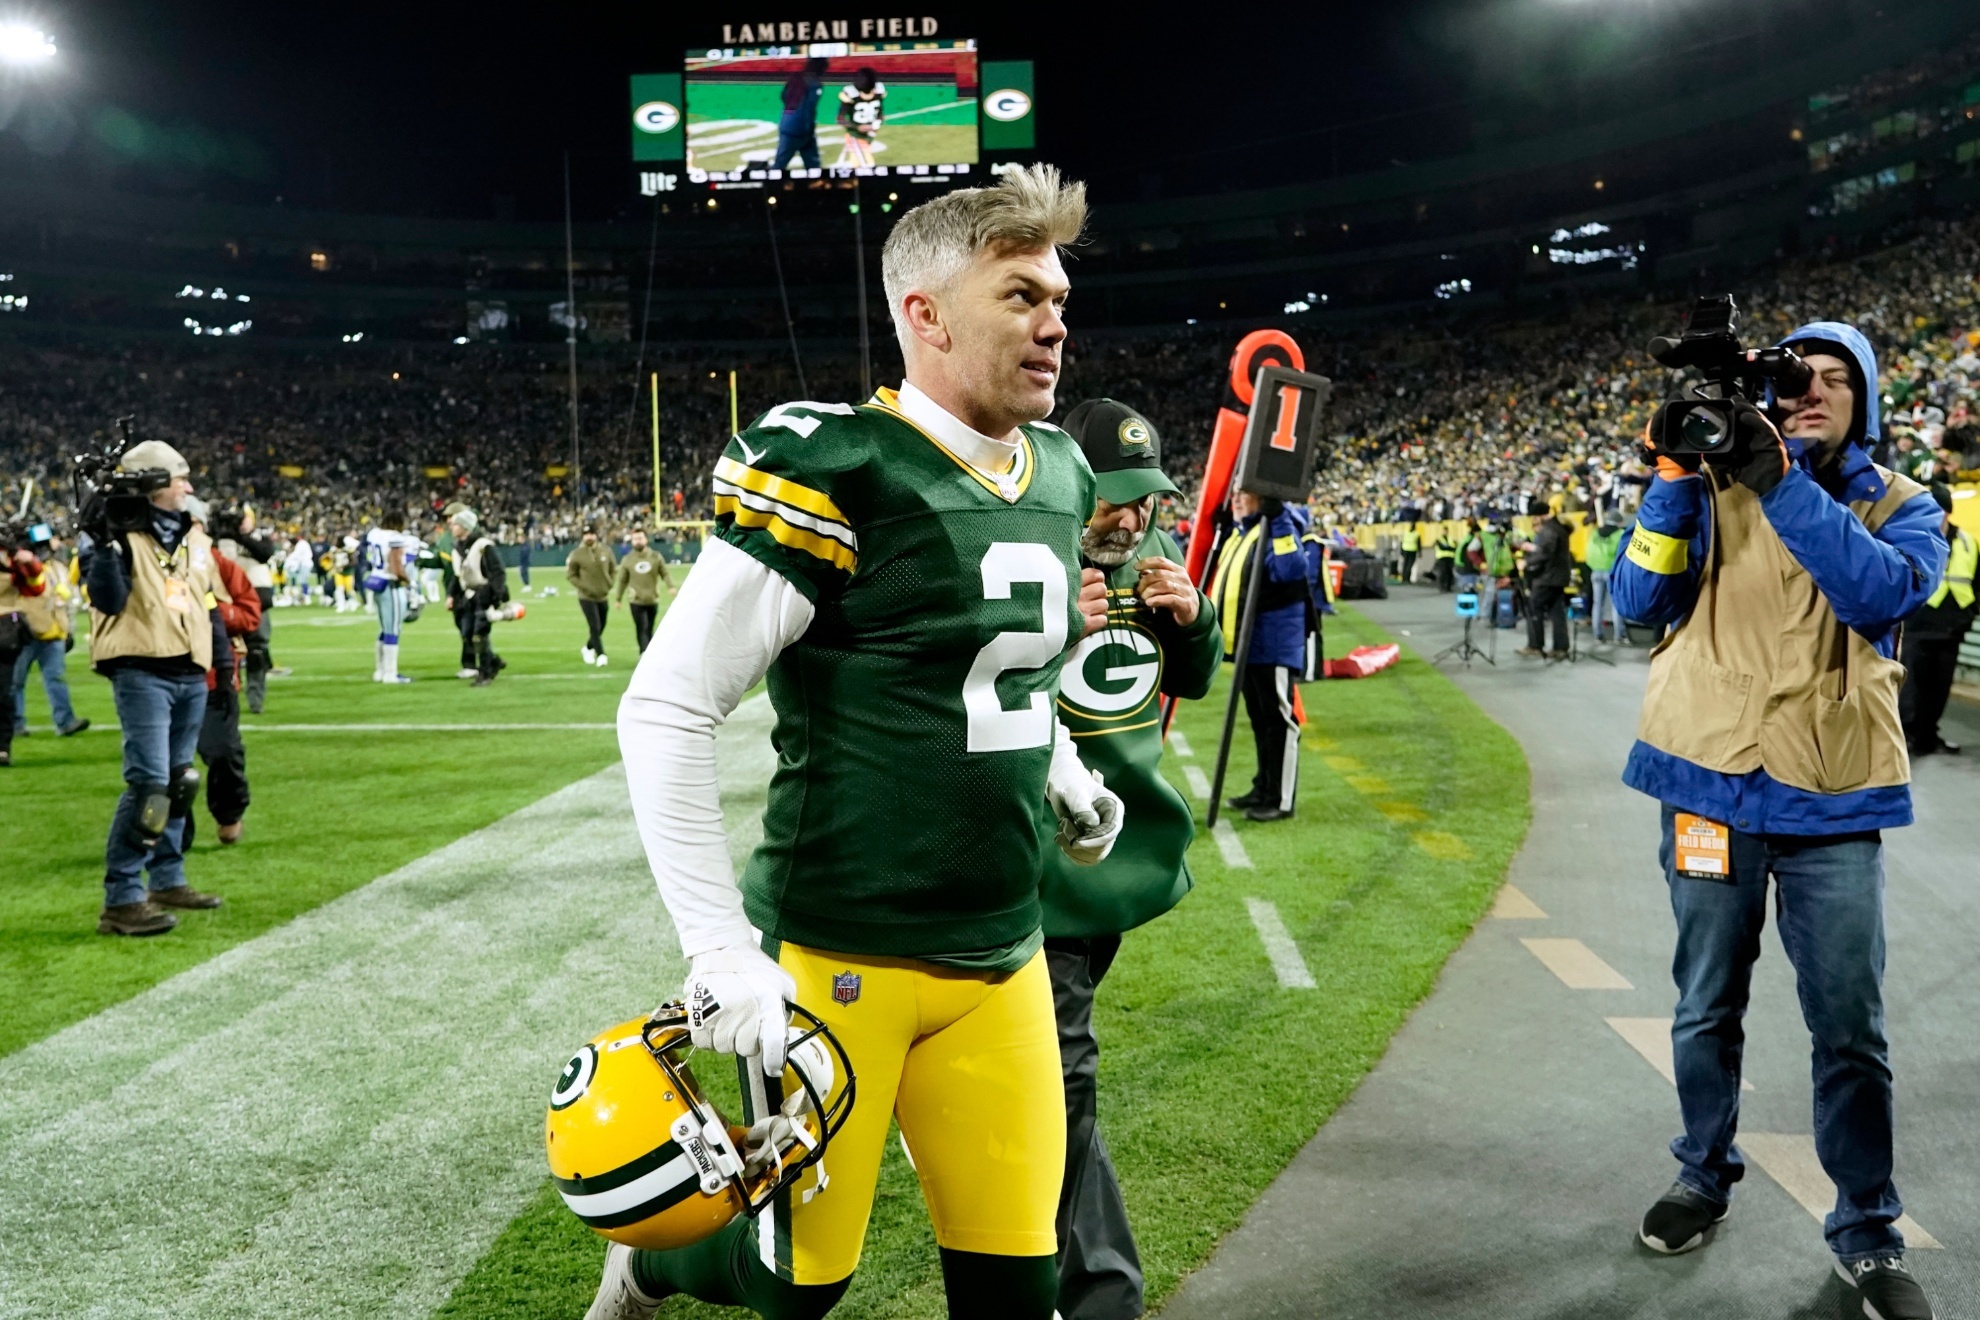 Mason Crosby sold his house in Green Bay; his future is uncertain